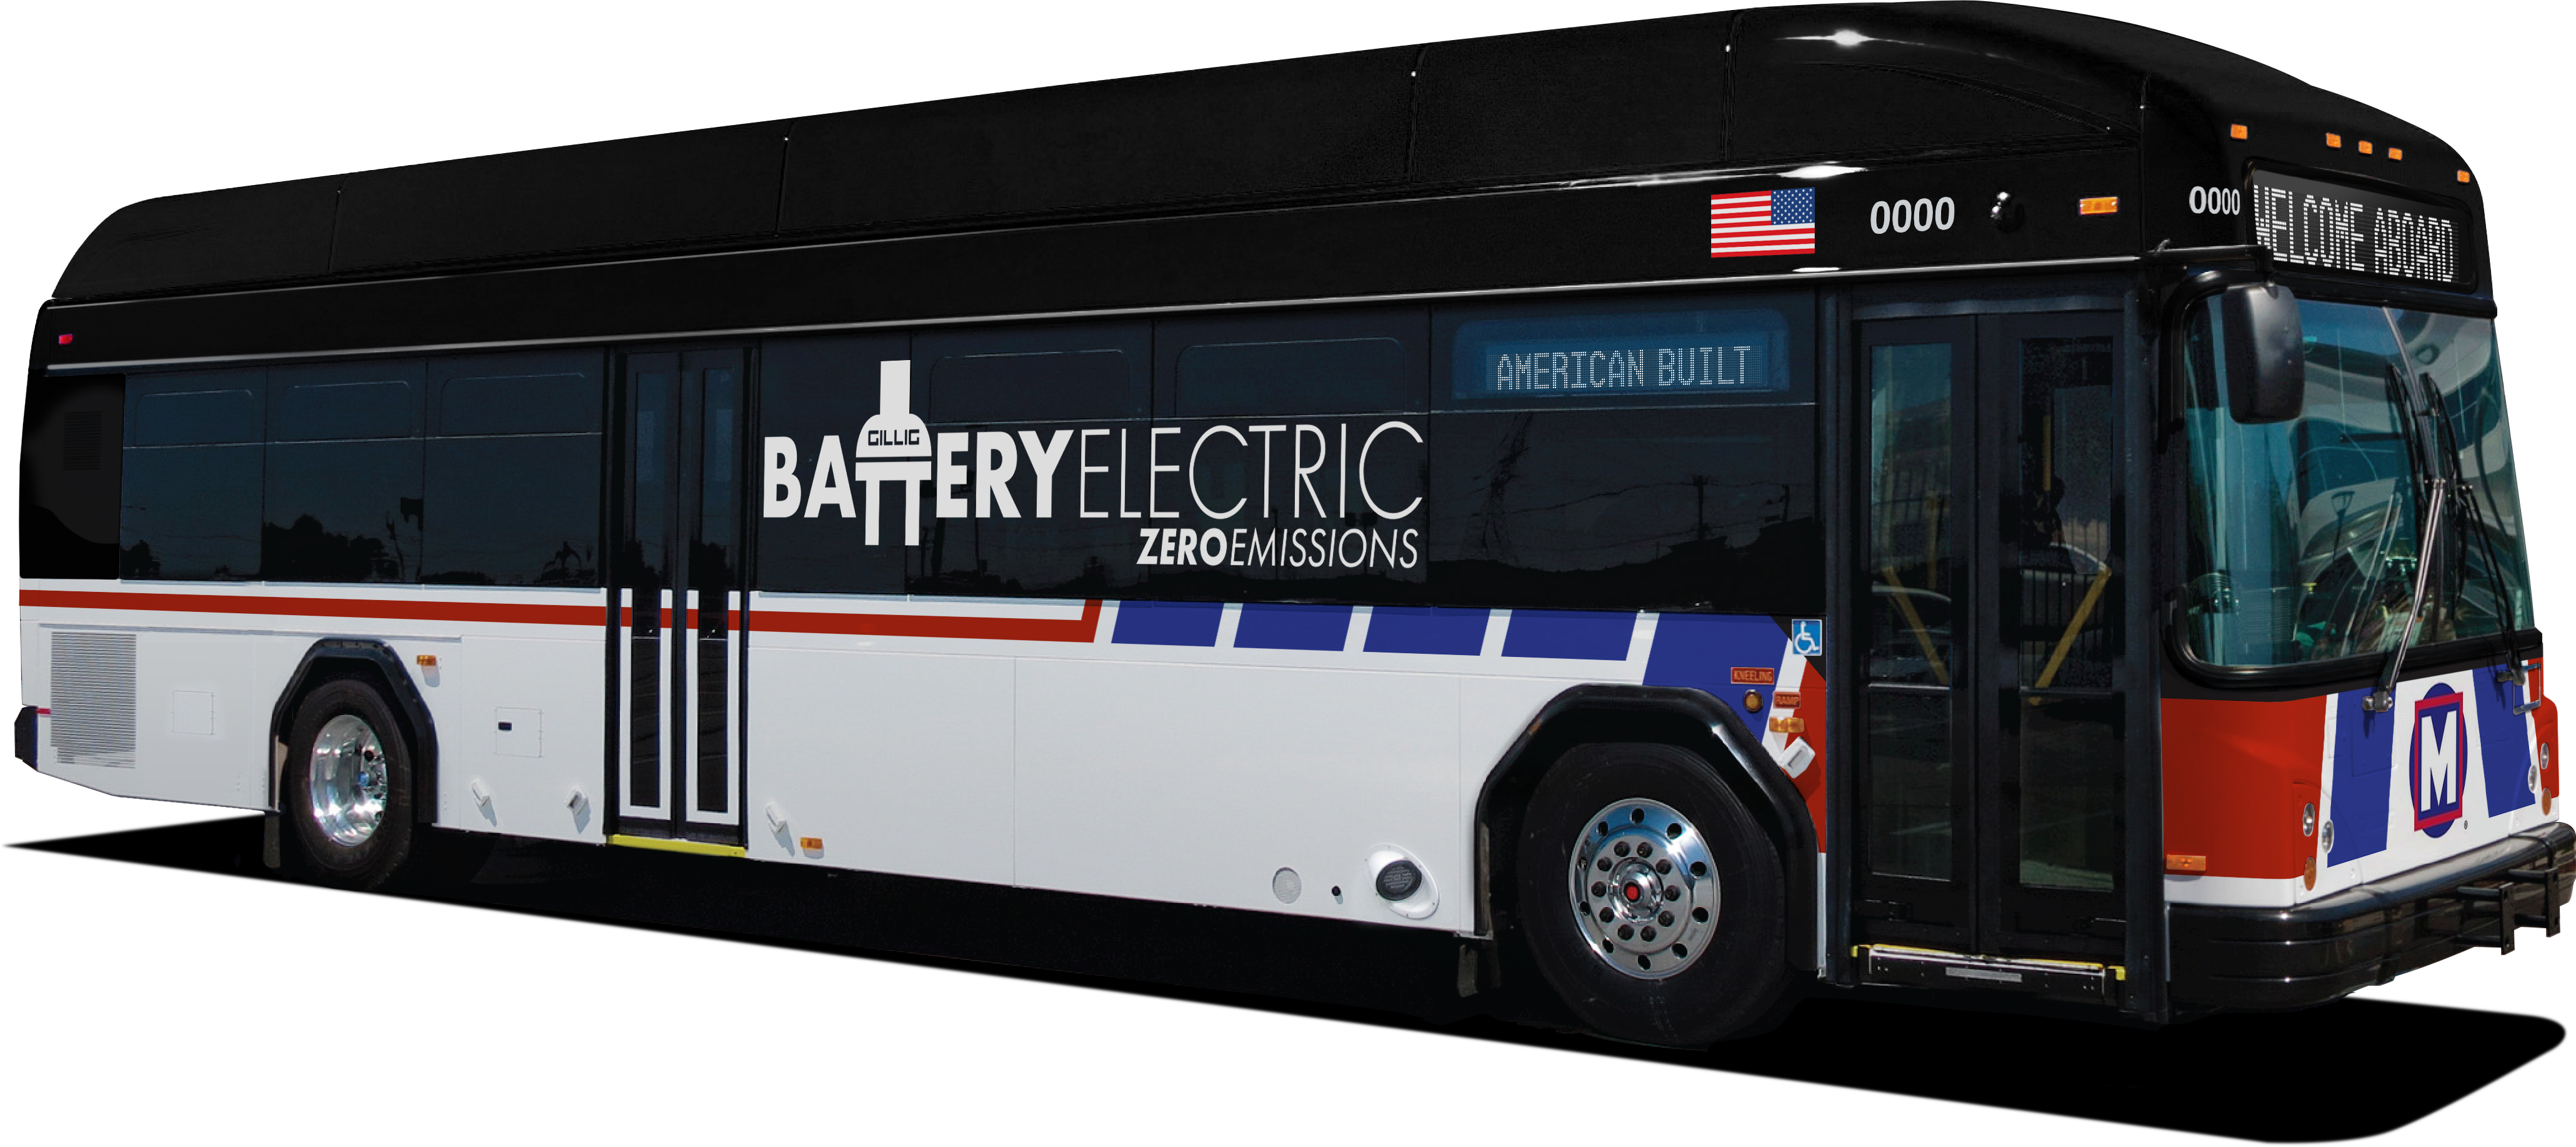 Metro Transit Lands 1 75 Million Grant To Add Electric Bus Technology To Fleet In 2020 Clayton Times